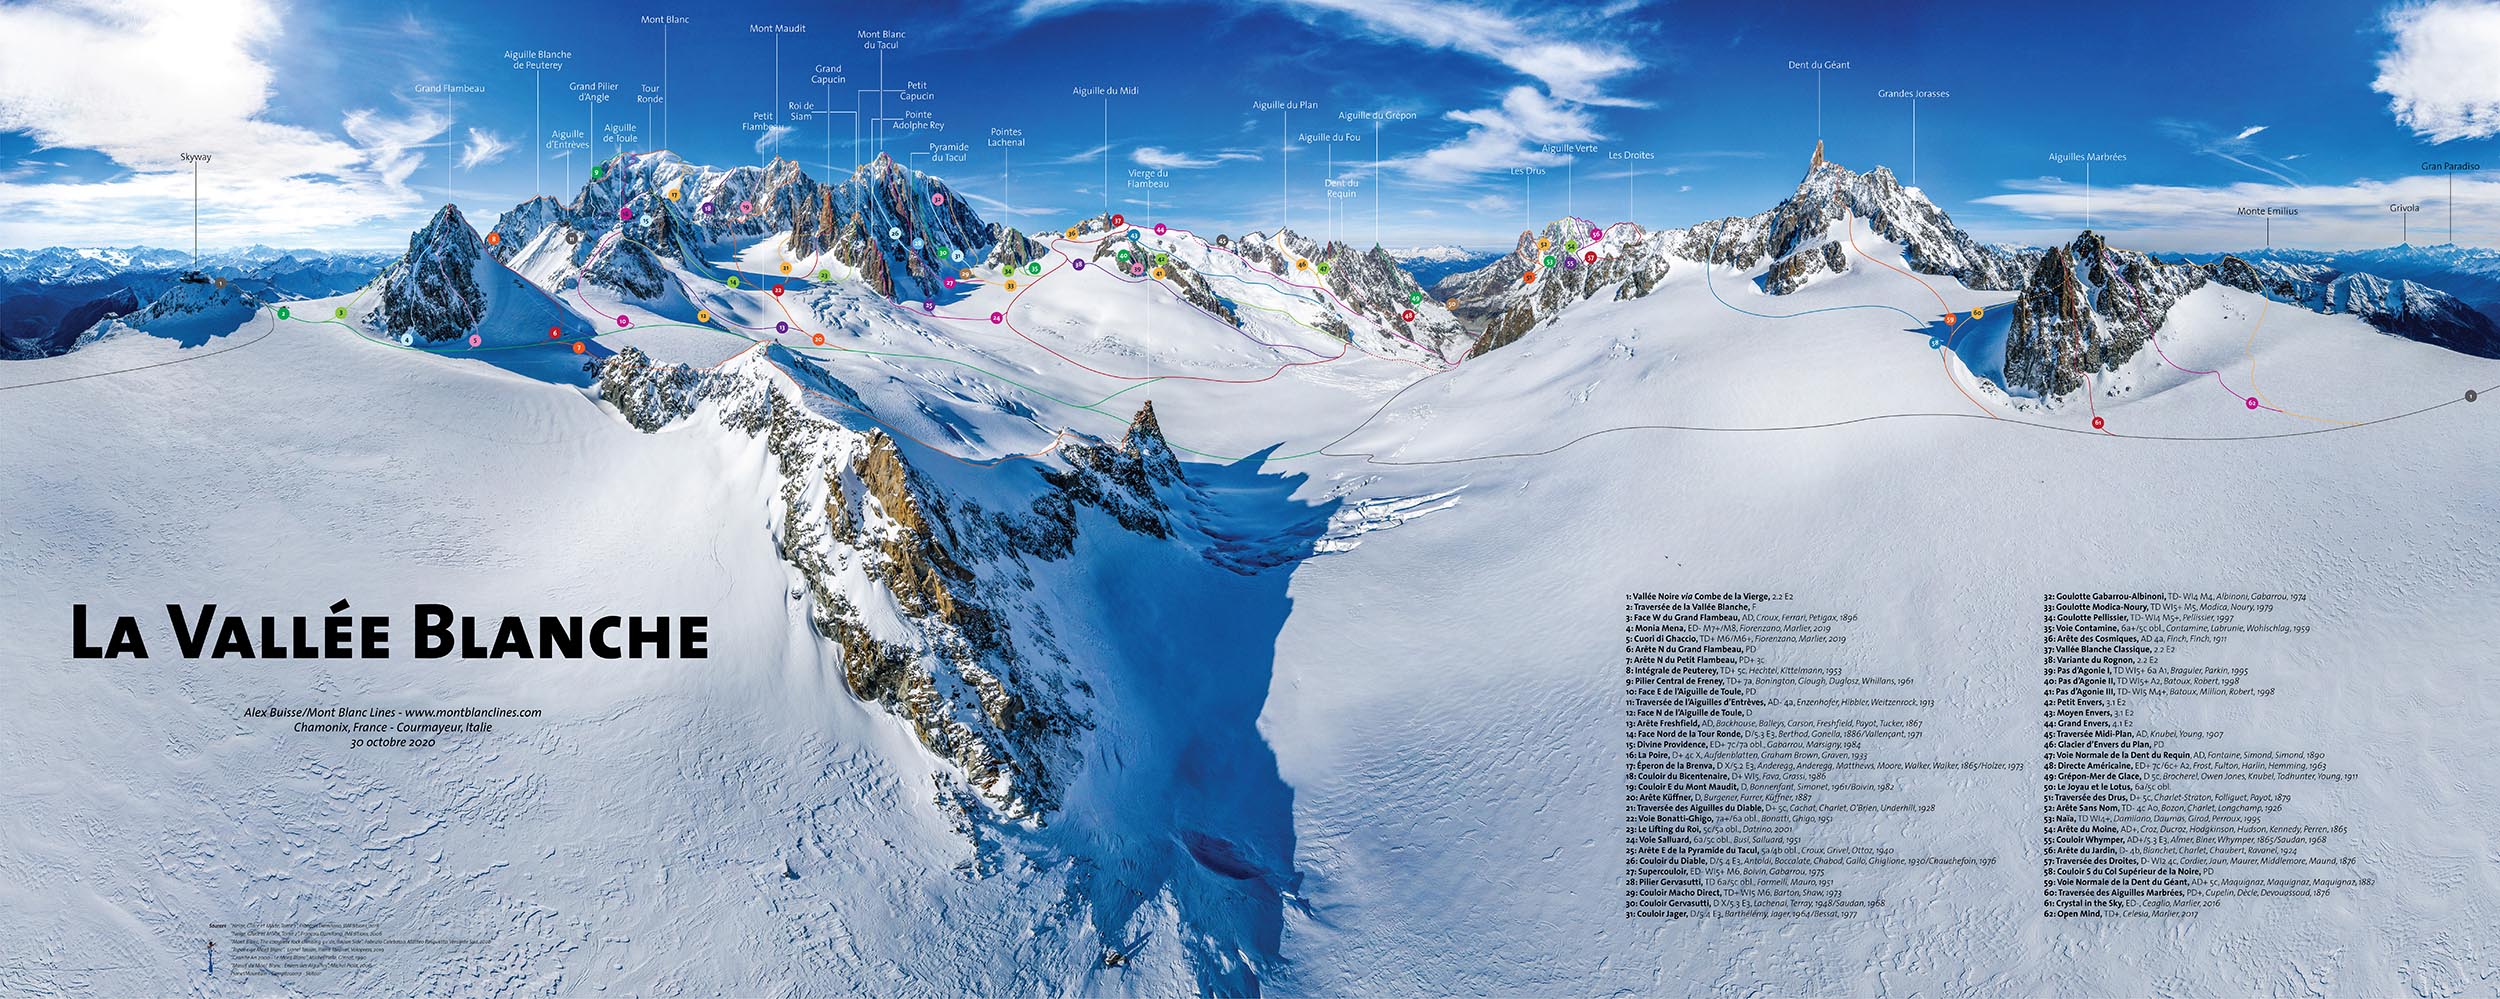 25 - vallee blanche - pano - gallery